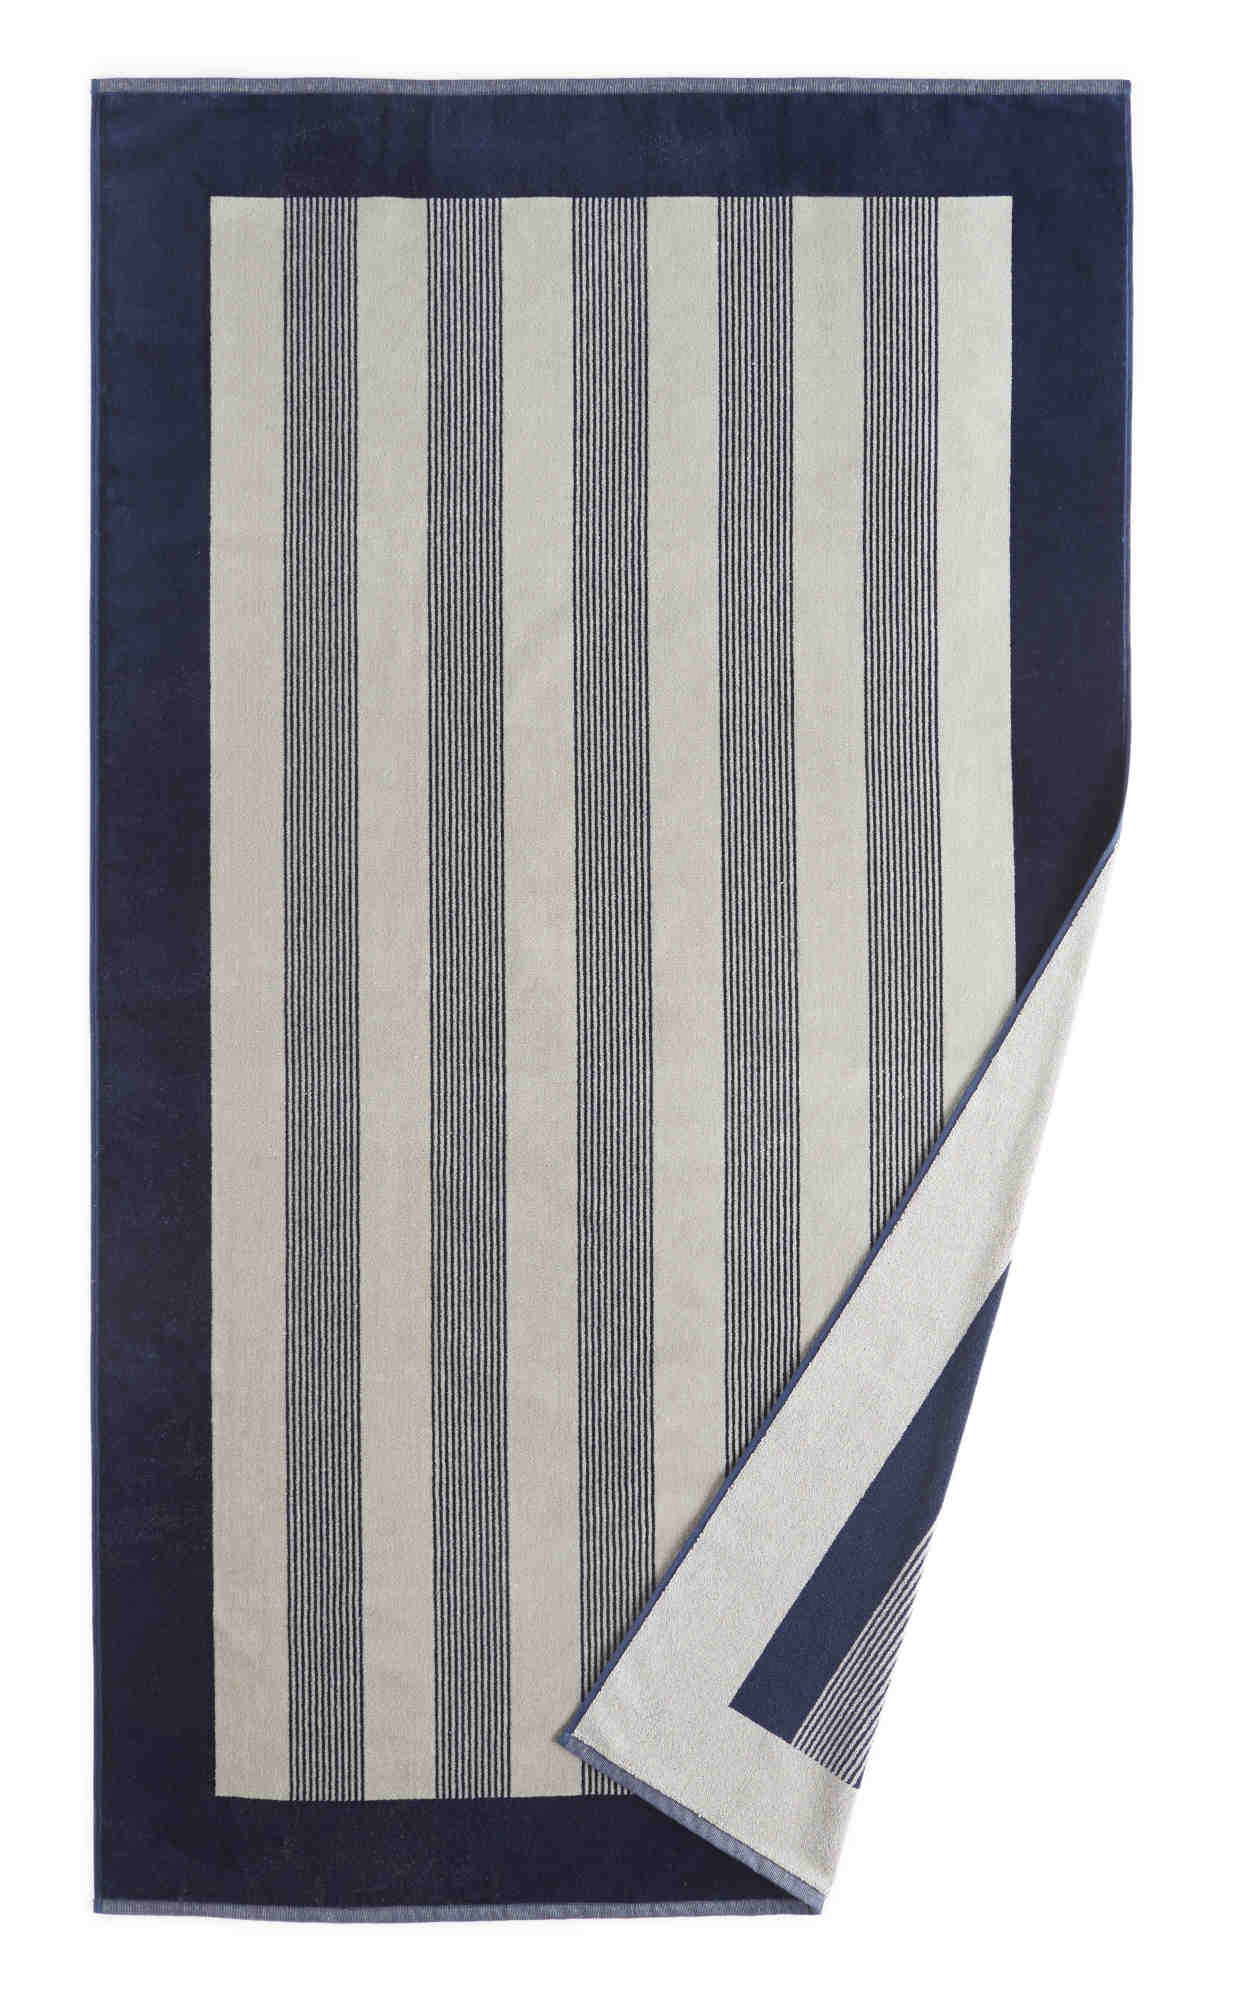 Peacock Alley Hudson Stripe Ribbed Cotton Towels